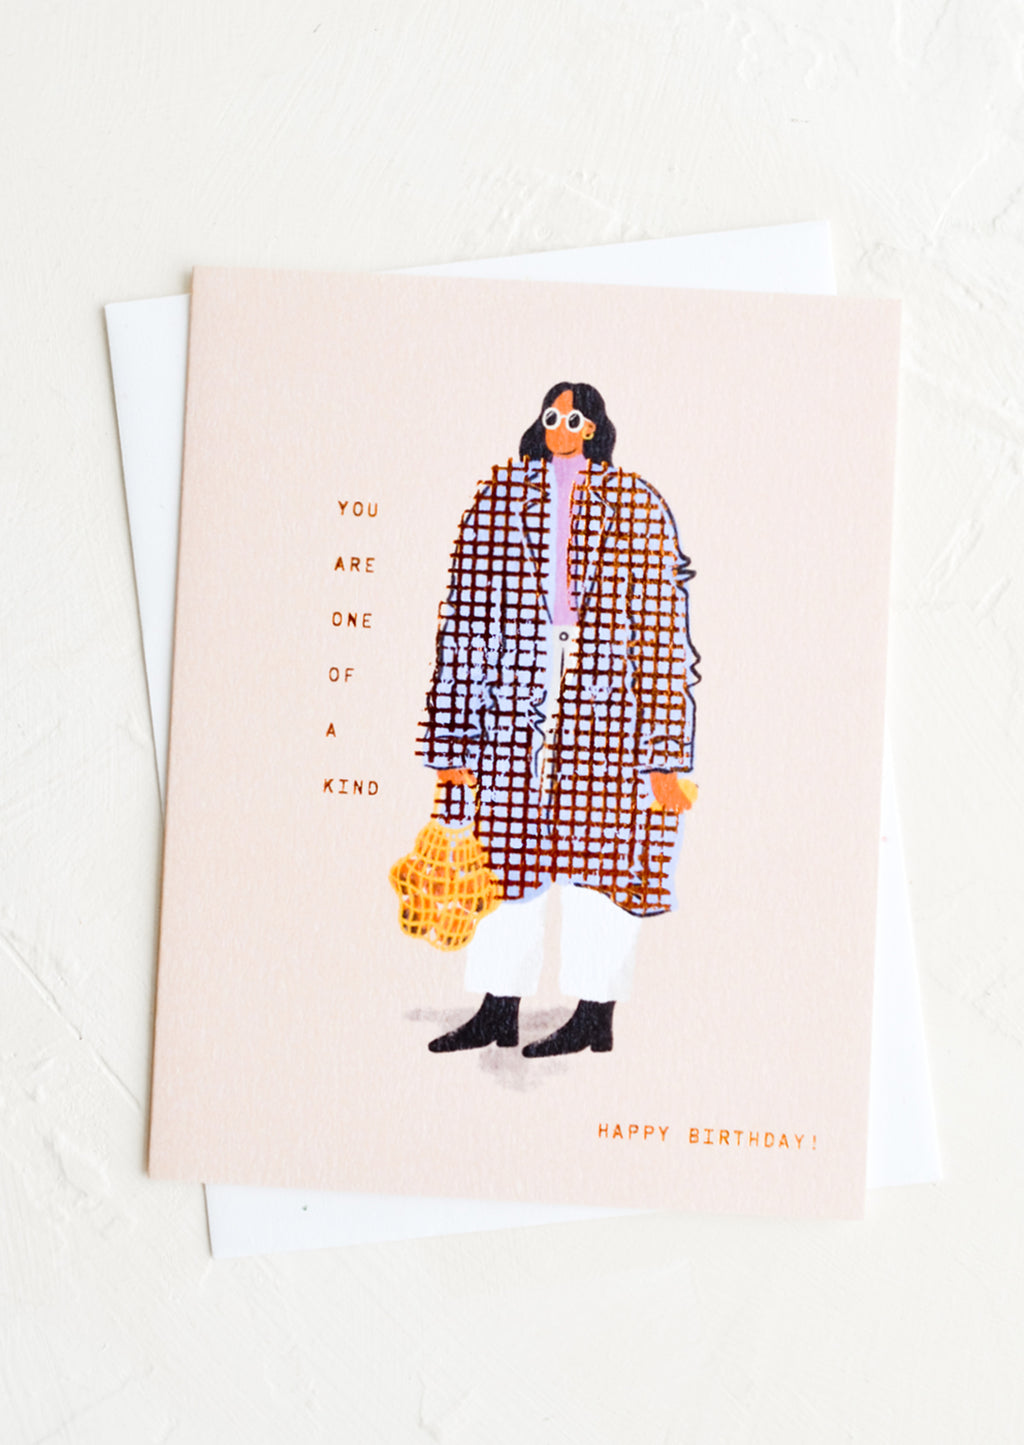 2: A greeting card with image of woman wearing baggy coat, text reads "You are one of a kind, happy birthday".